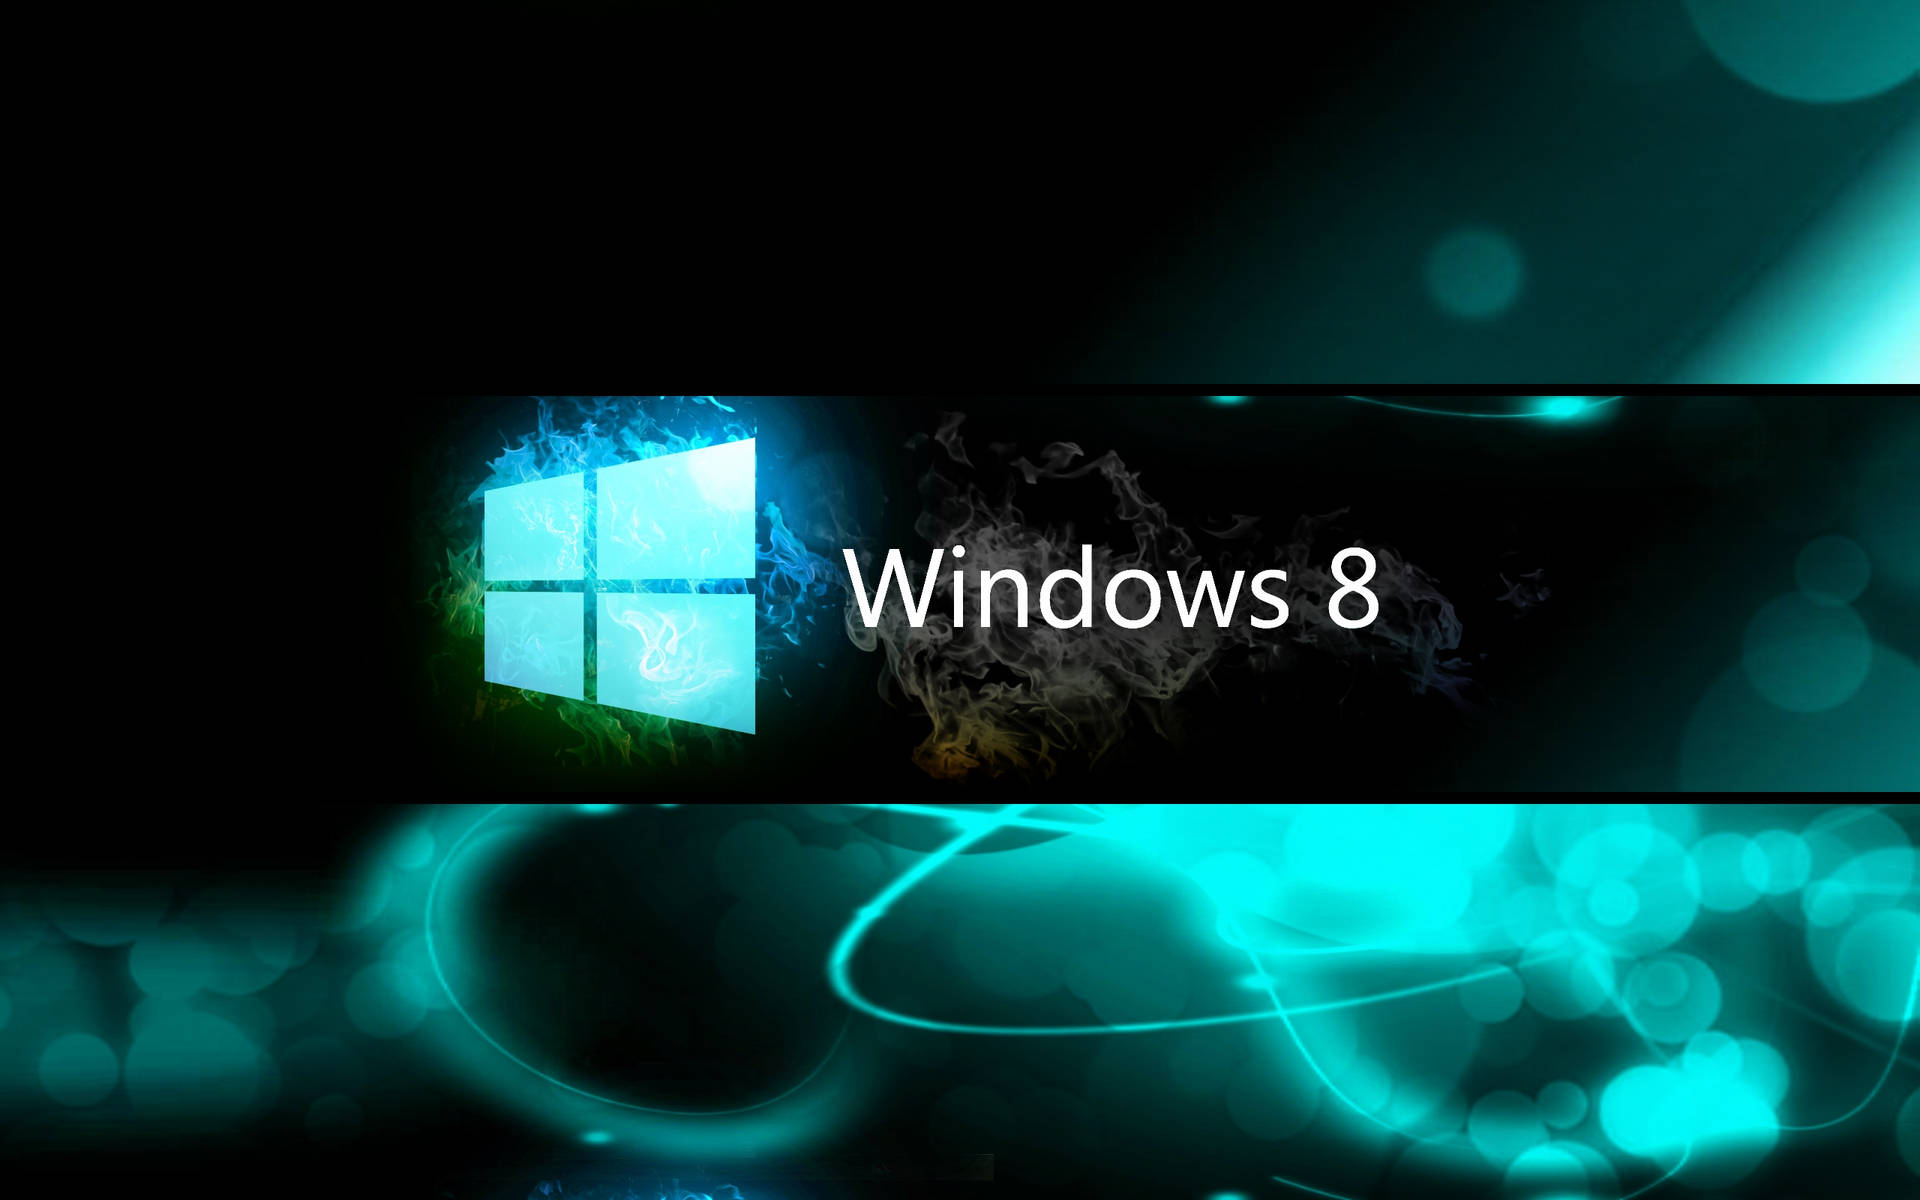 Windows 8 Abstract Teal Graphic Wallpaper